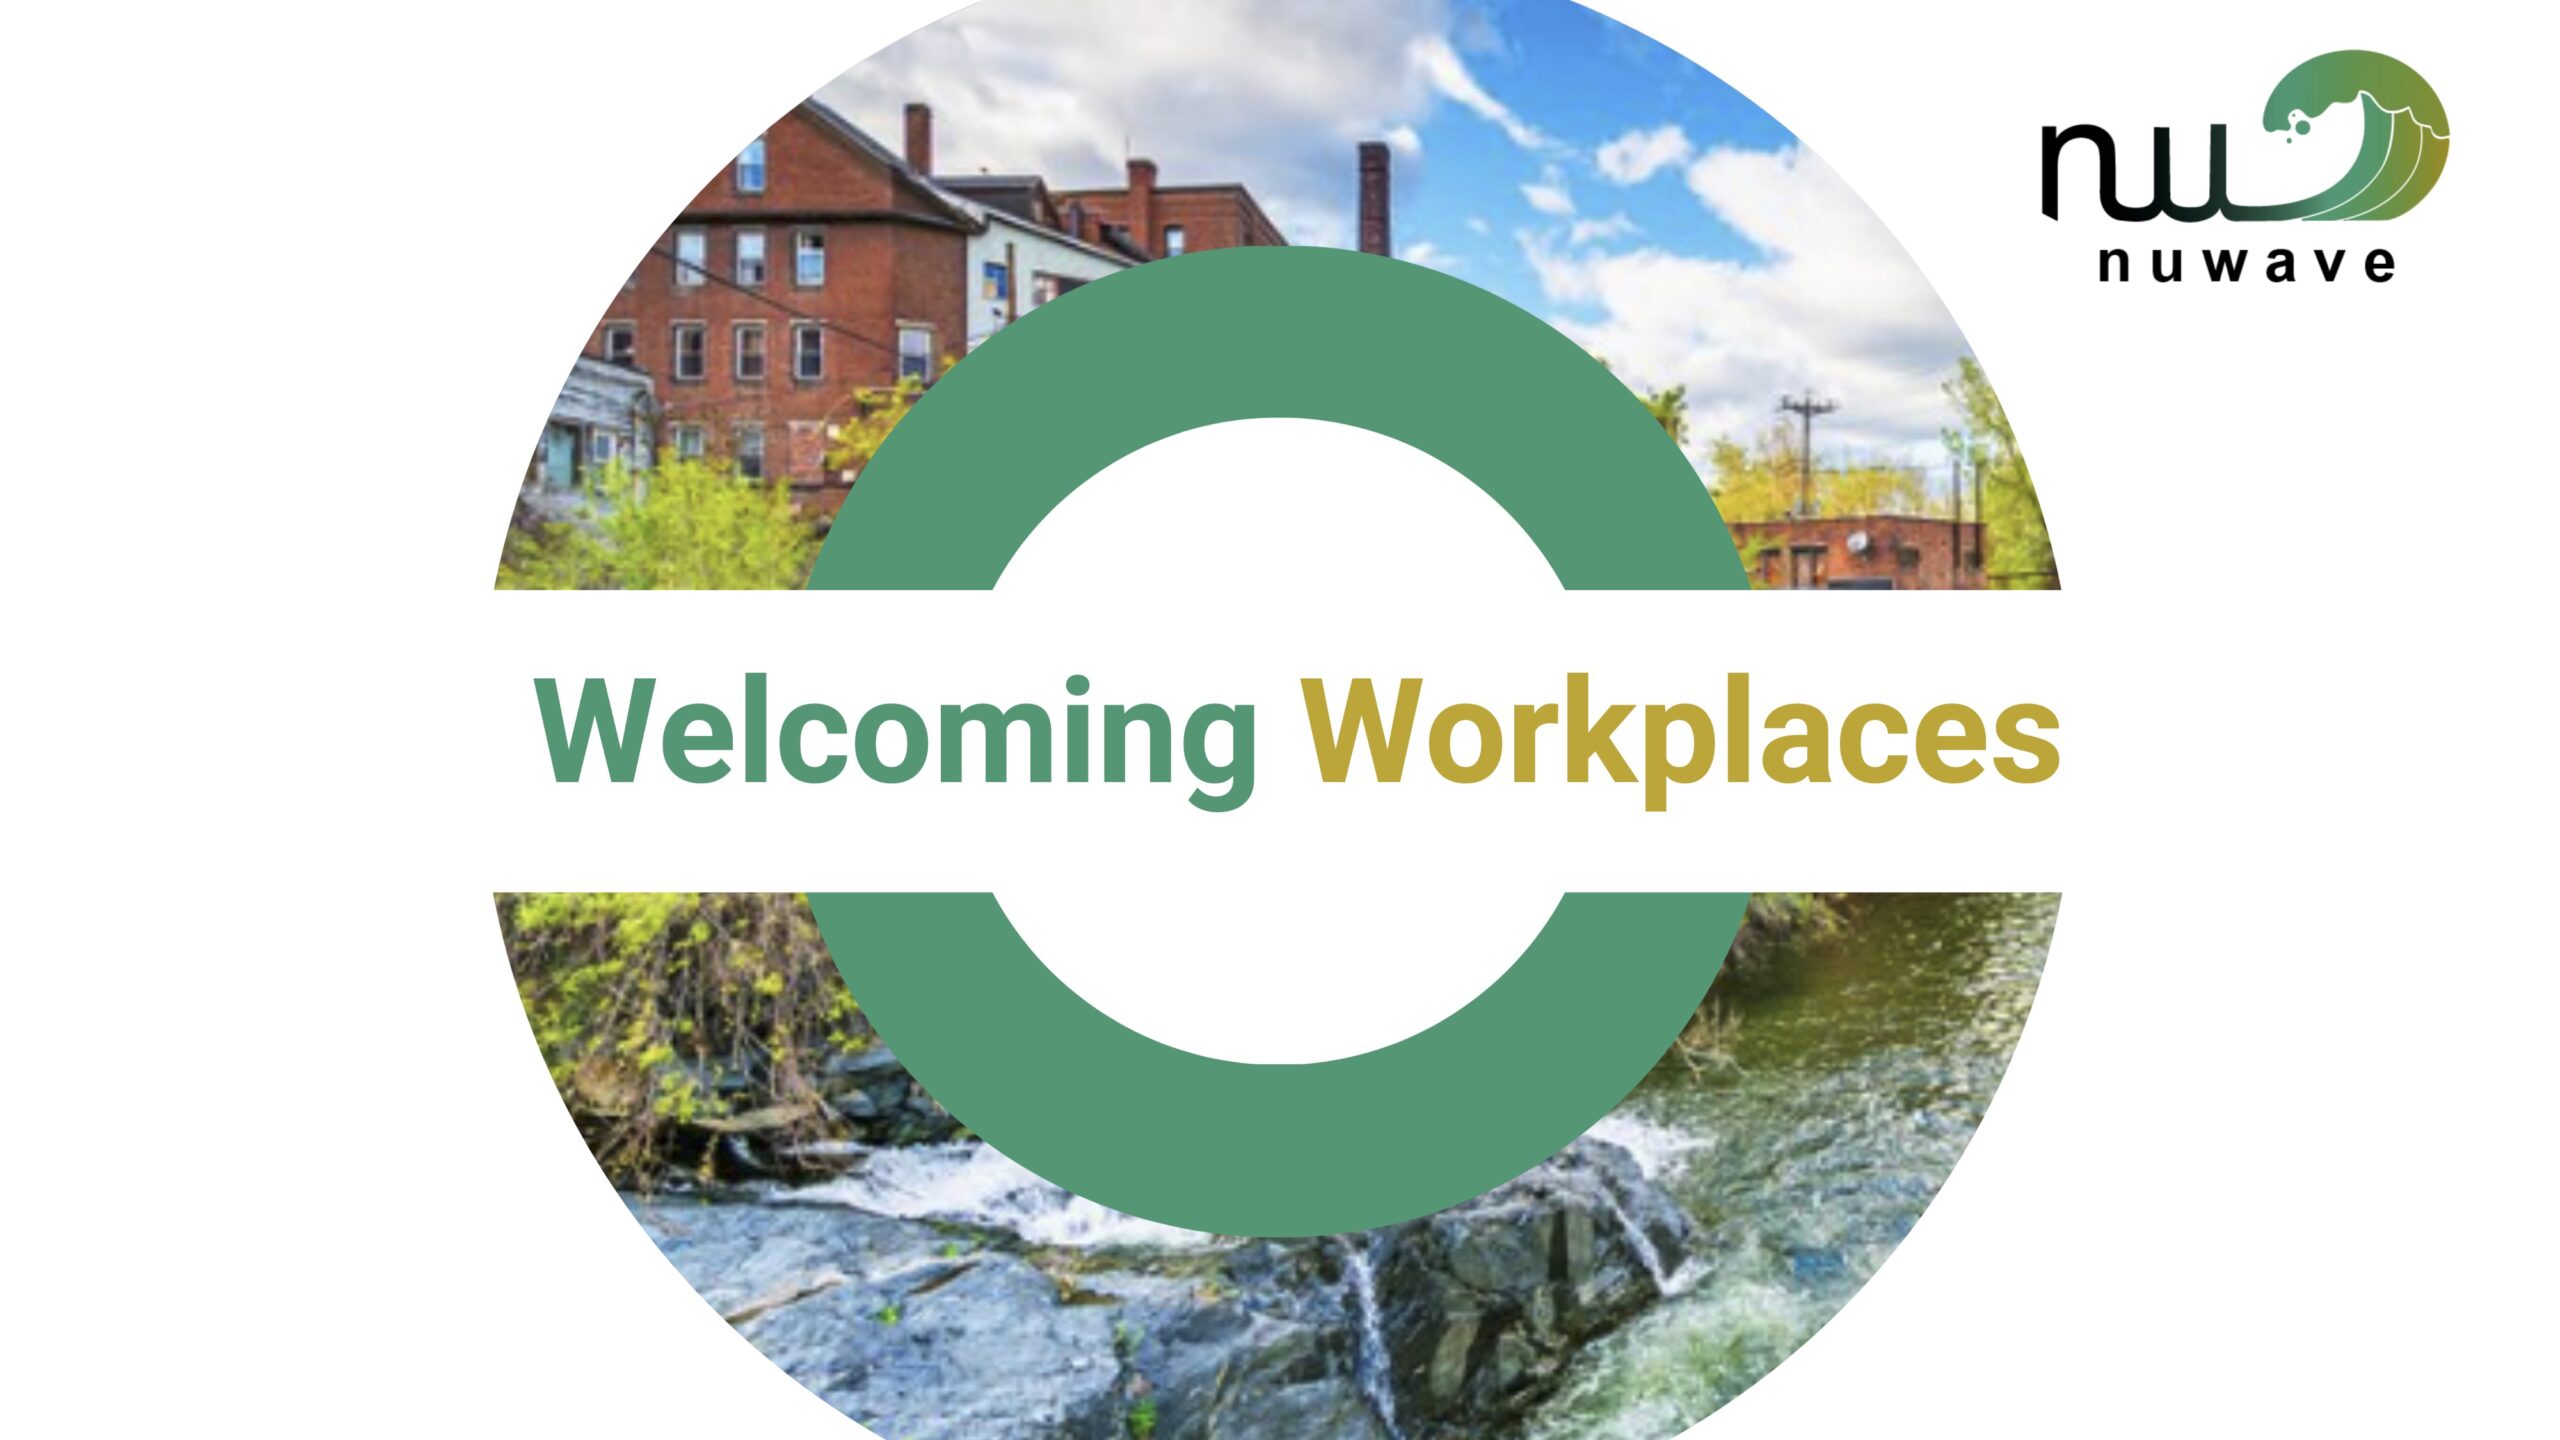 Welcoming Workplaces 6.13